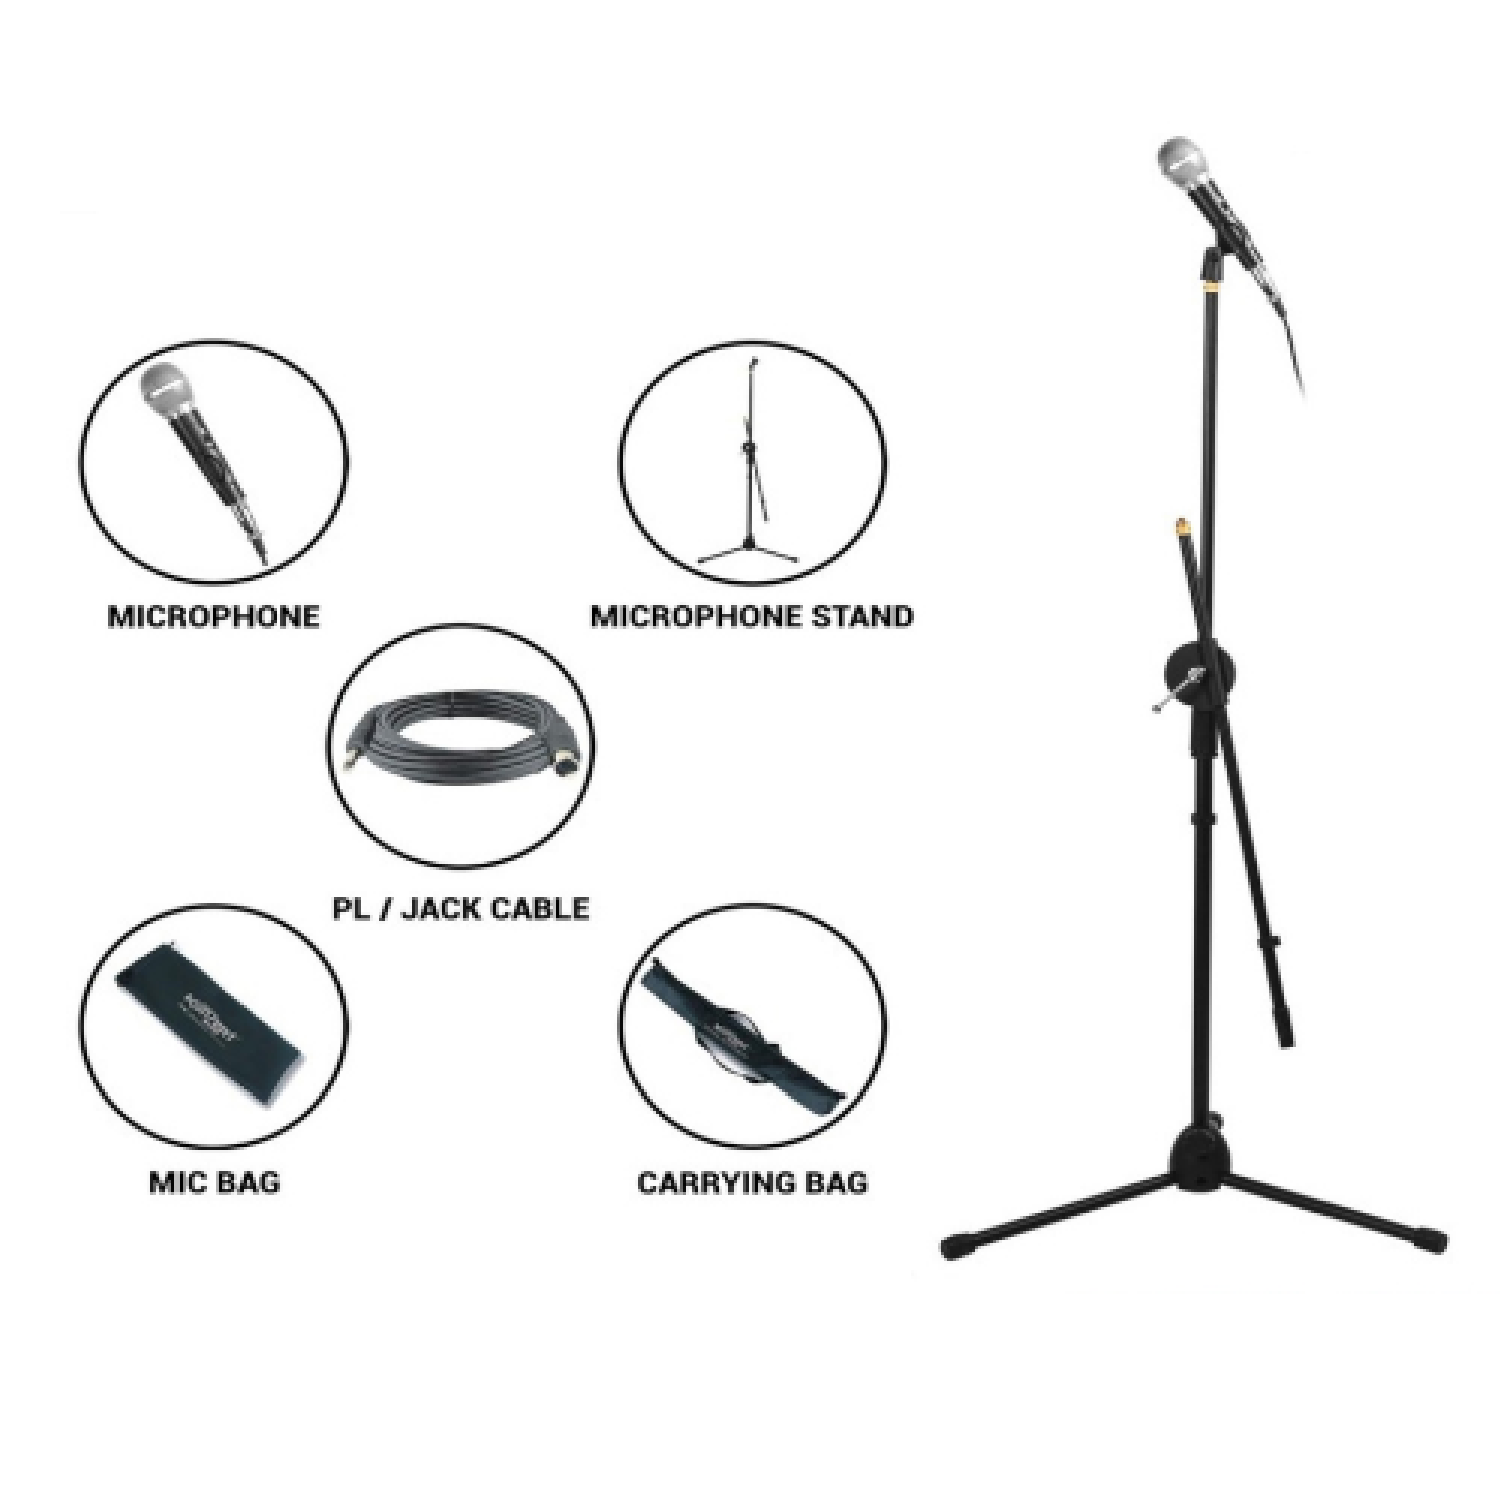 Personal Microphone Kit Mic, Stand and Carrying Bag   MK 101 konzert